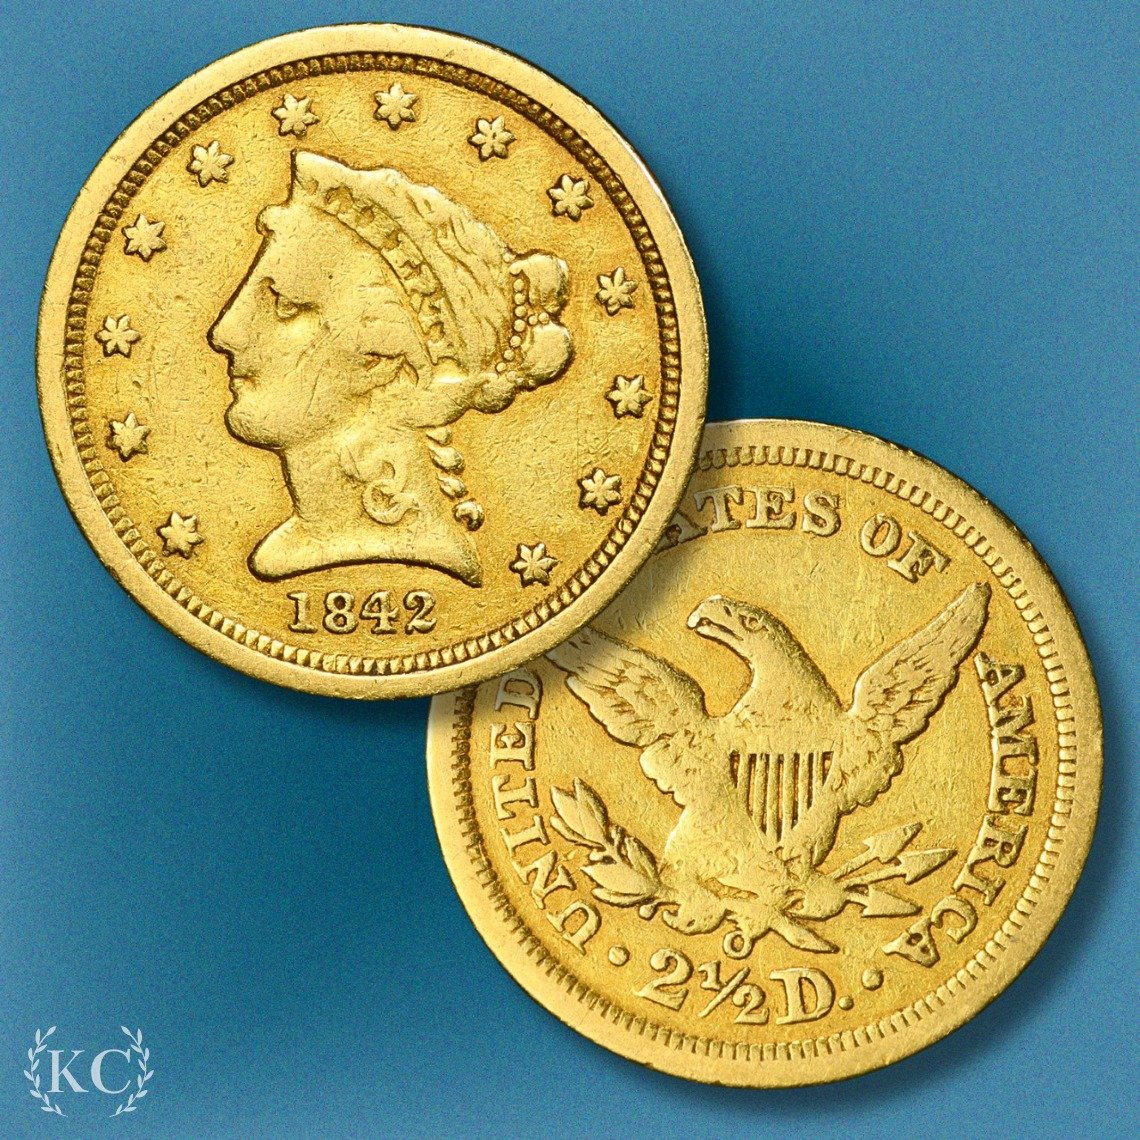 Beauty, history, and value all packed in one small coin! Add this Gold $2.50 Liberty Head  to your collection today!✨

#Gold #PCGS #KatyCoin